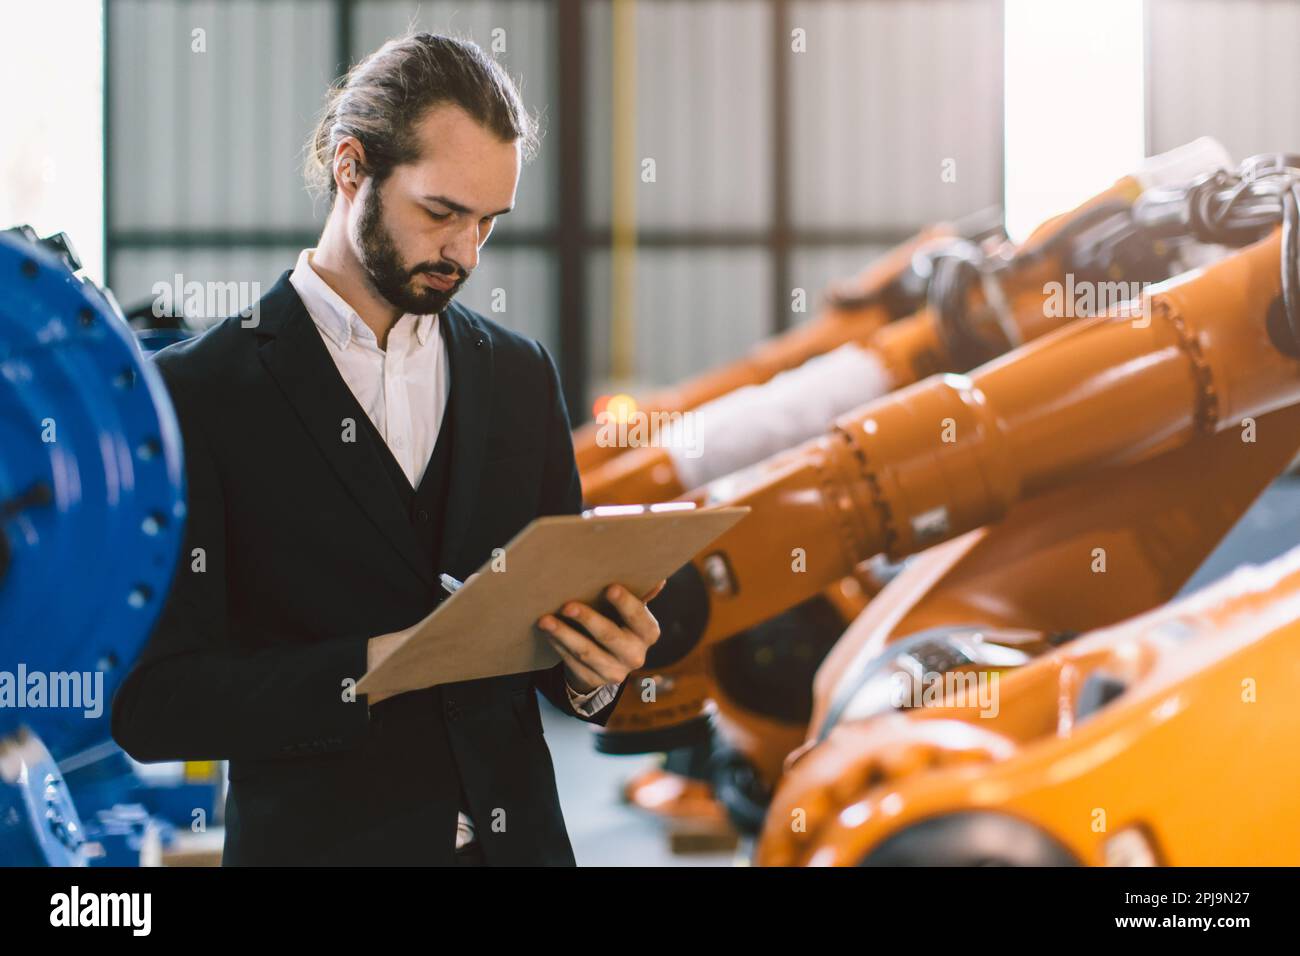 Businessman working in heavy industry machinery assembly factory plant for industrial business products sales man. Stock Photo